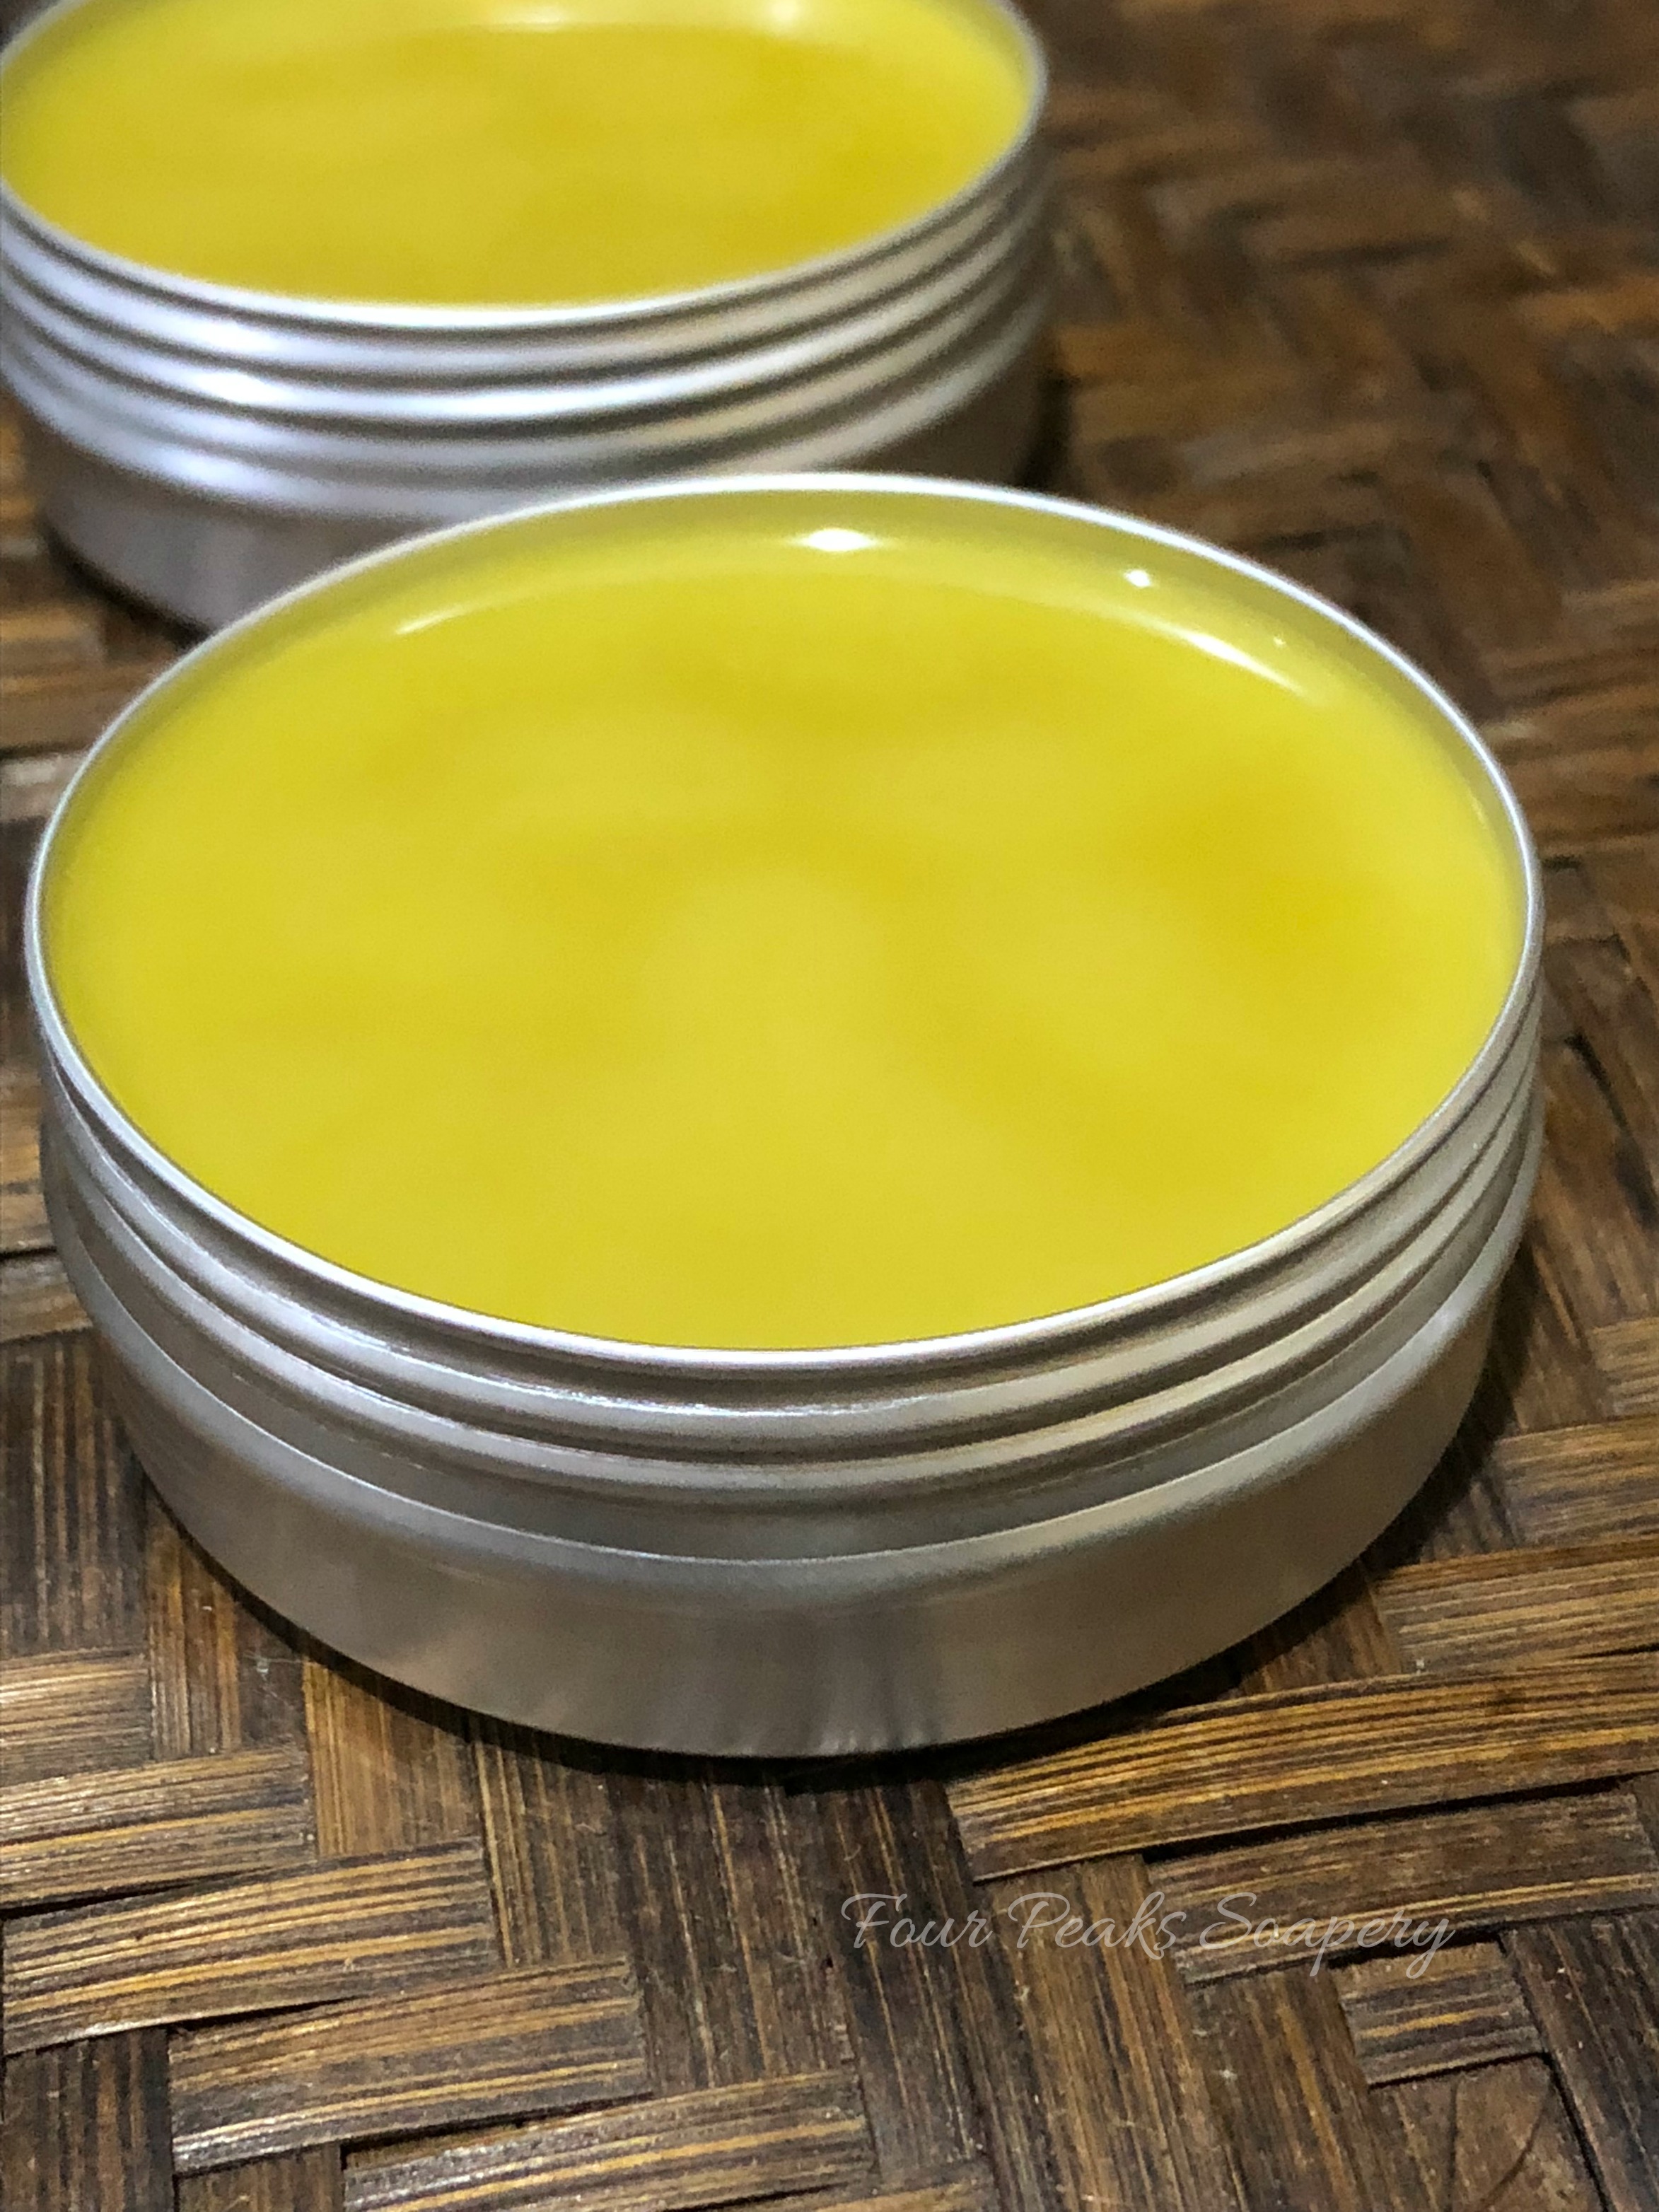 Chaparral salve - a simple soothing blend of chaparral, olive oil and beeswax, wonderful to support minor cuts, scrapes, burns and dry skin.